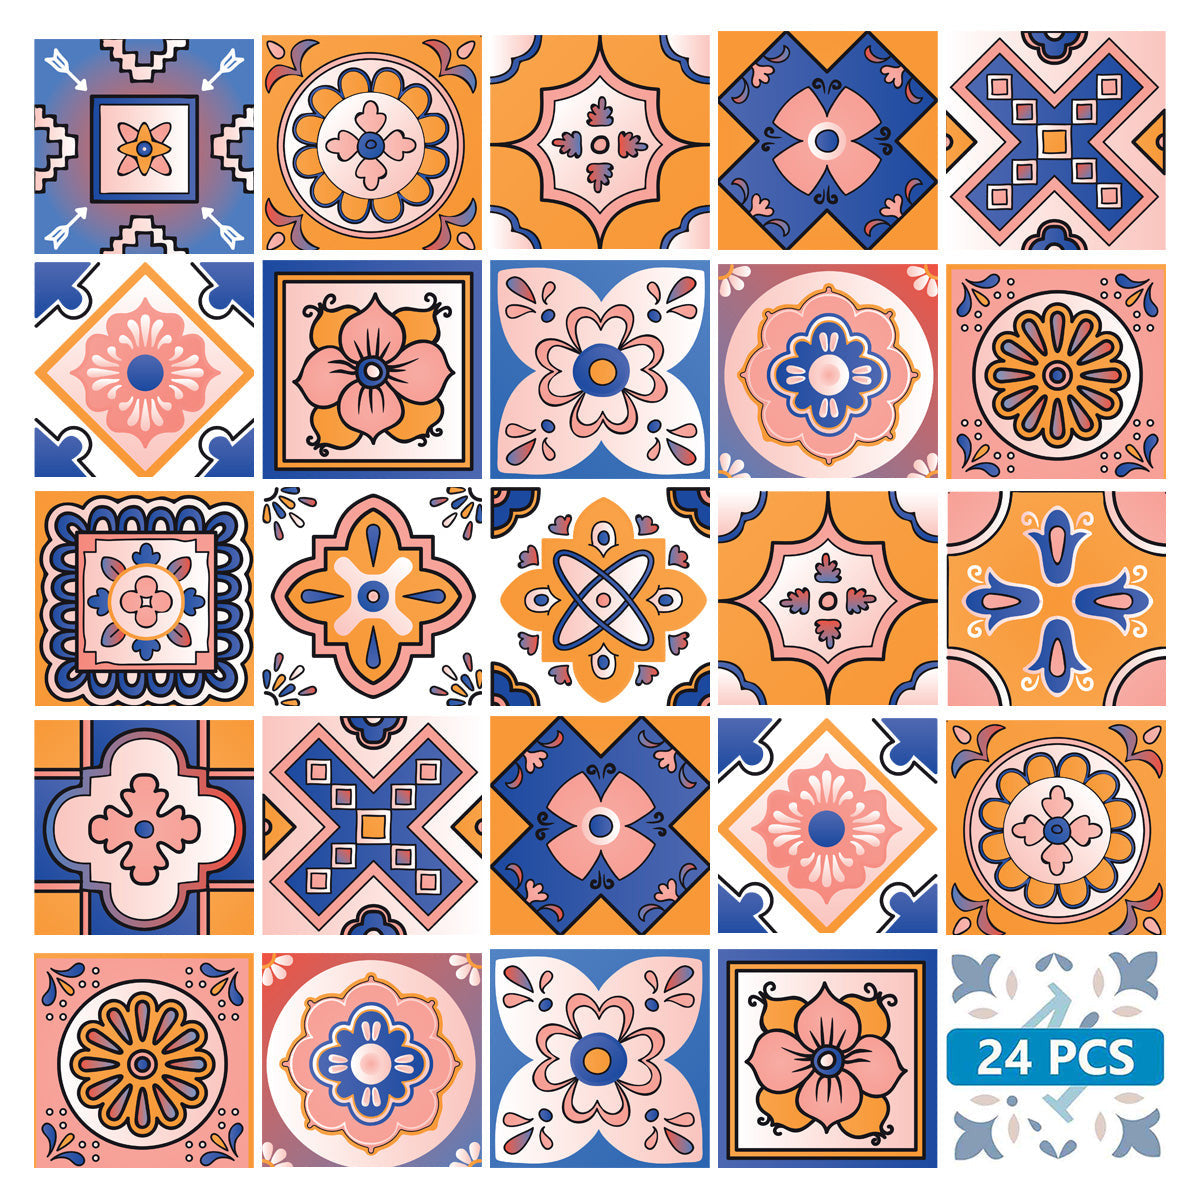 7" x 7" Blue Gold and Blush Mosaic Peel and Stick Removable Tiles